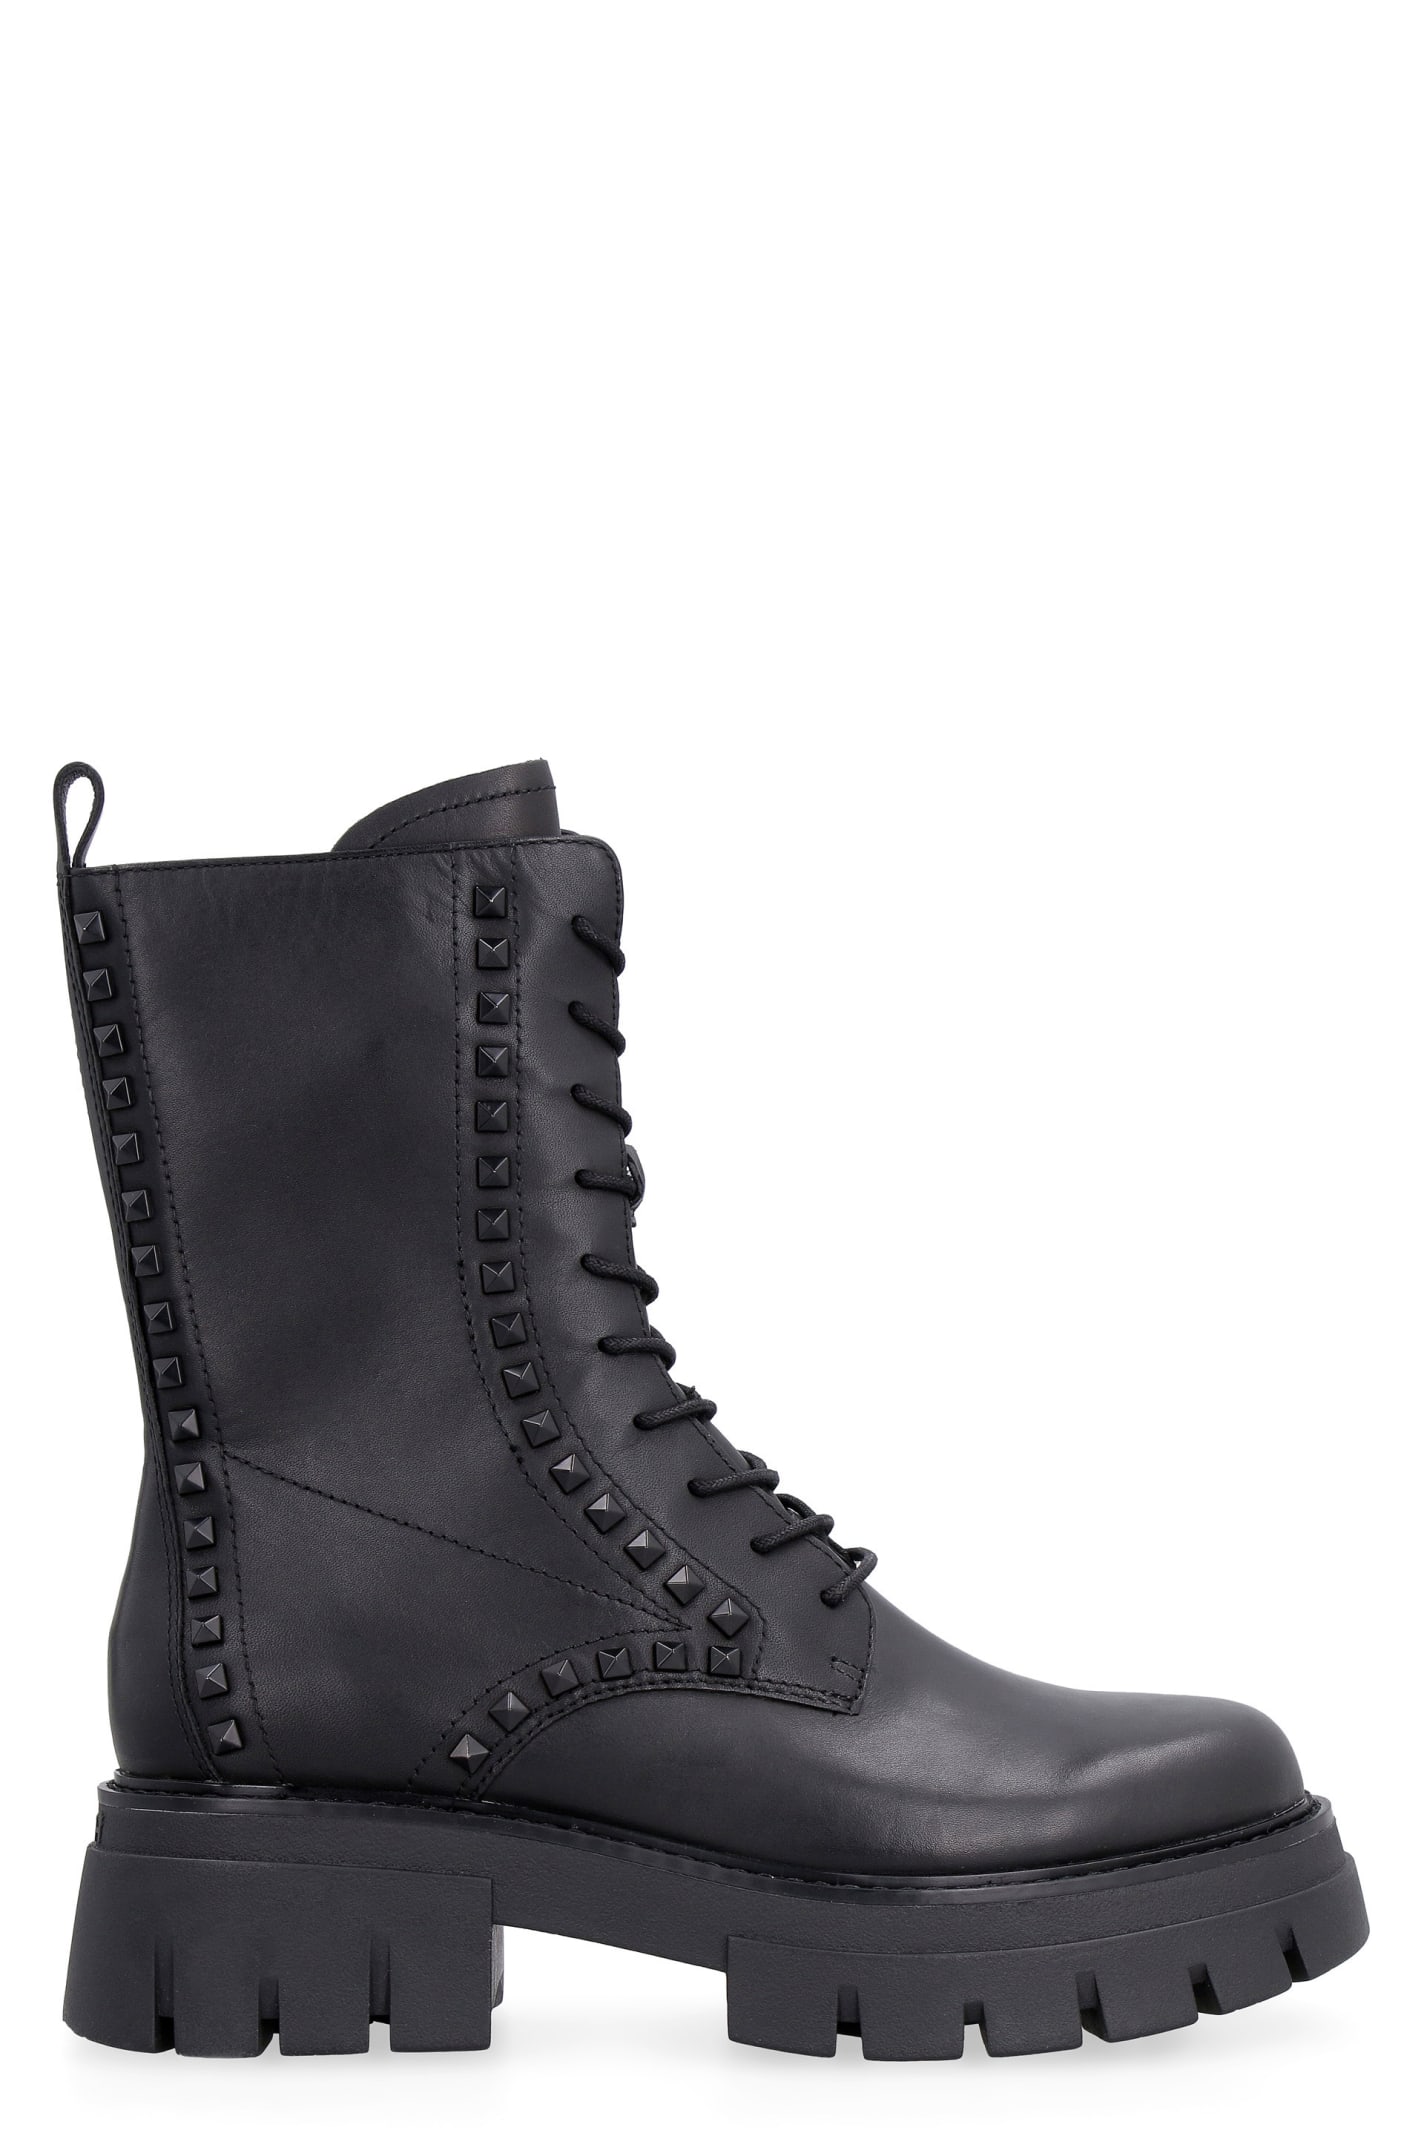 Ash Liam Studs Leather Combat Boots In Black | ModeSens